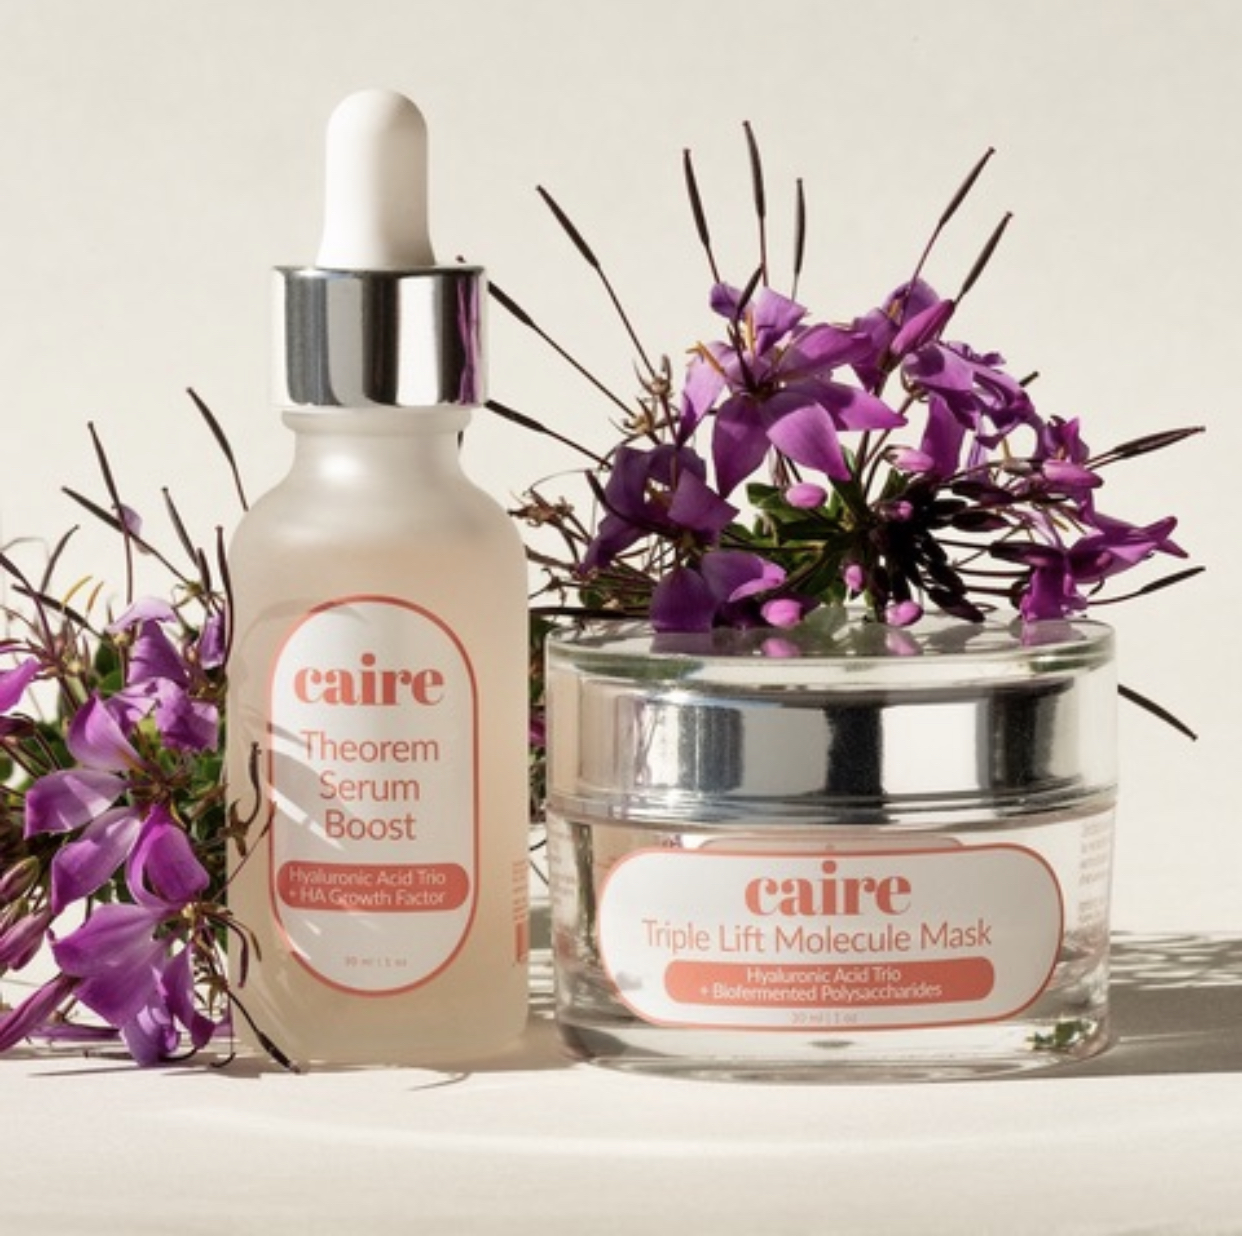 Caire Beauty Launches “Hormone Defying” Skincare